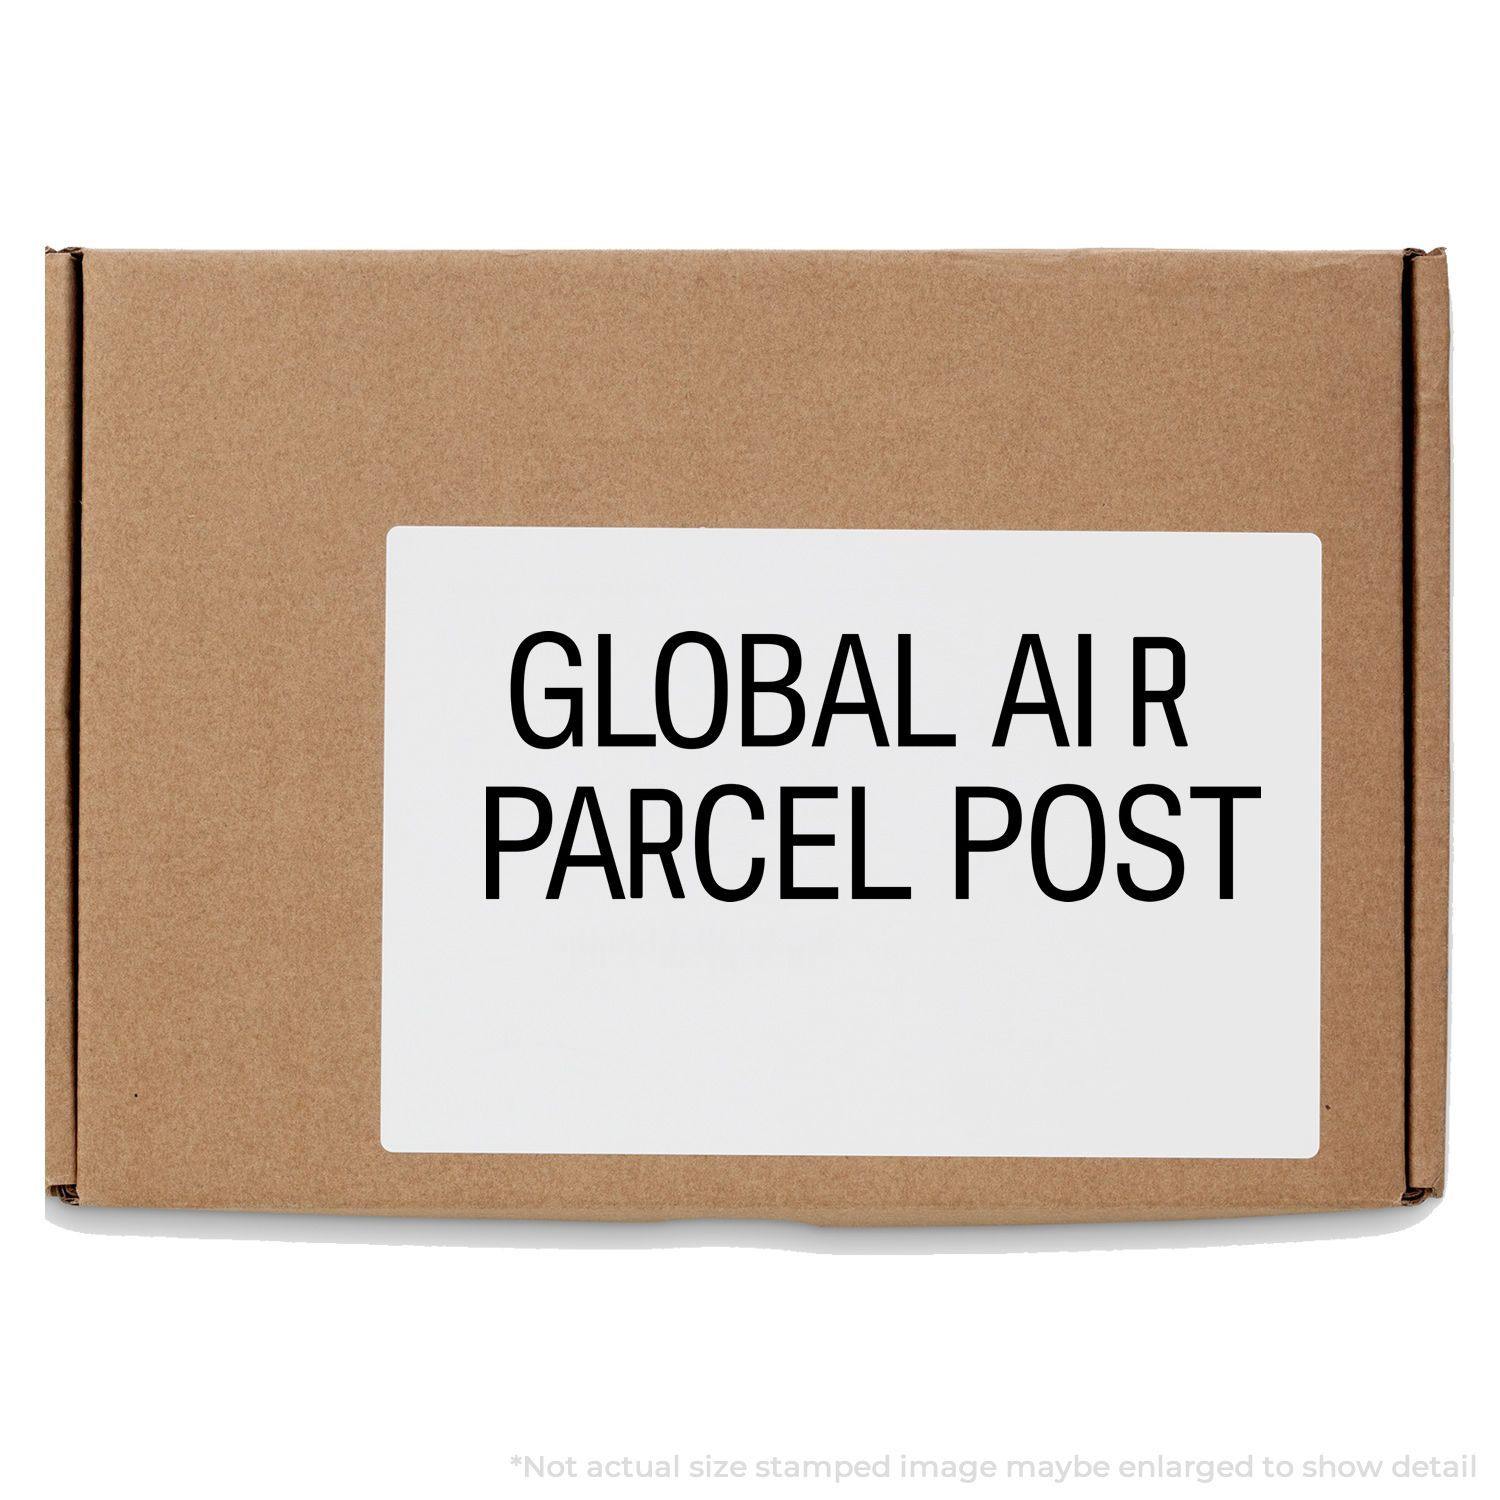 A self-inking stamp with a stamped image showing how the text "GLOBAL AIR PARCEL POST" in a large font is displayed by it after stamping.